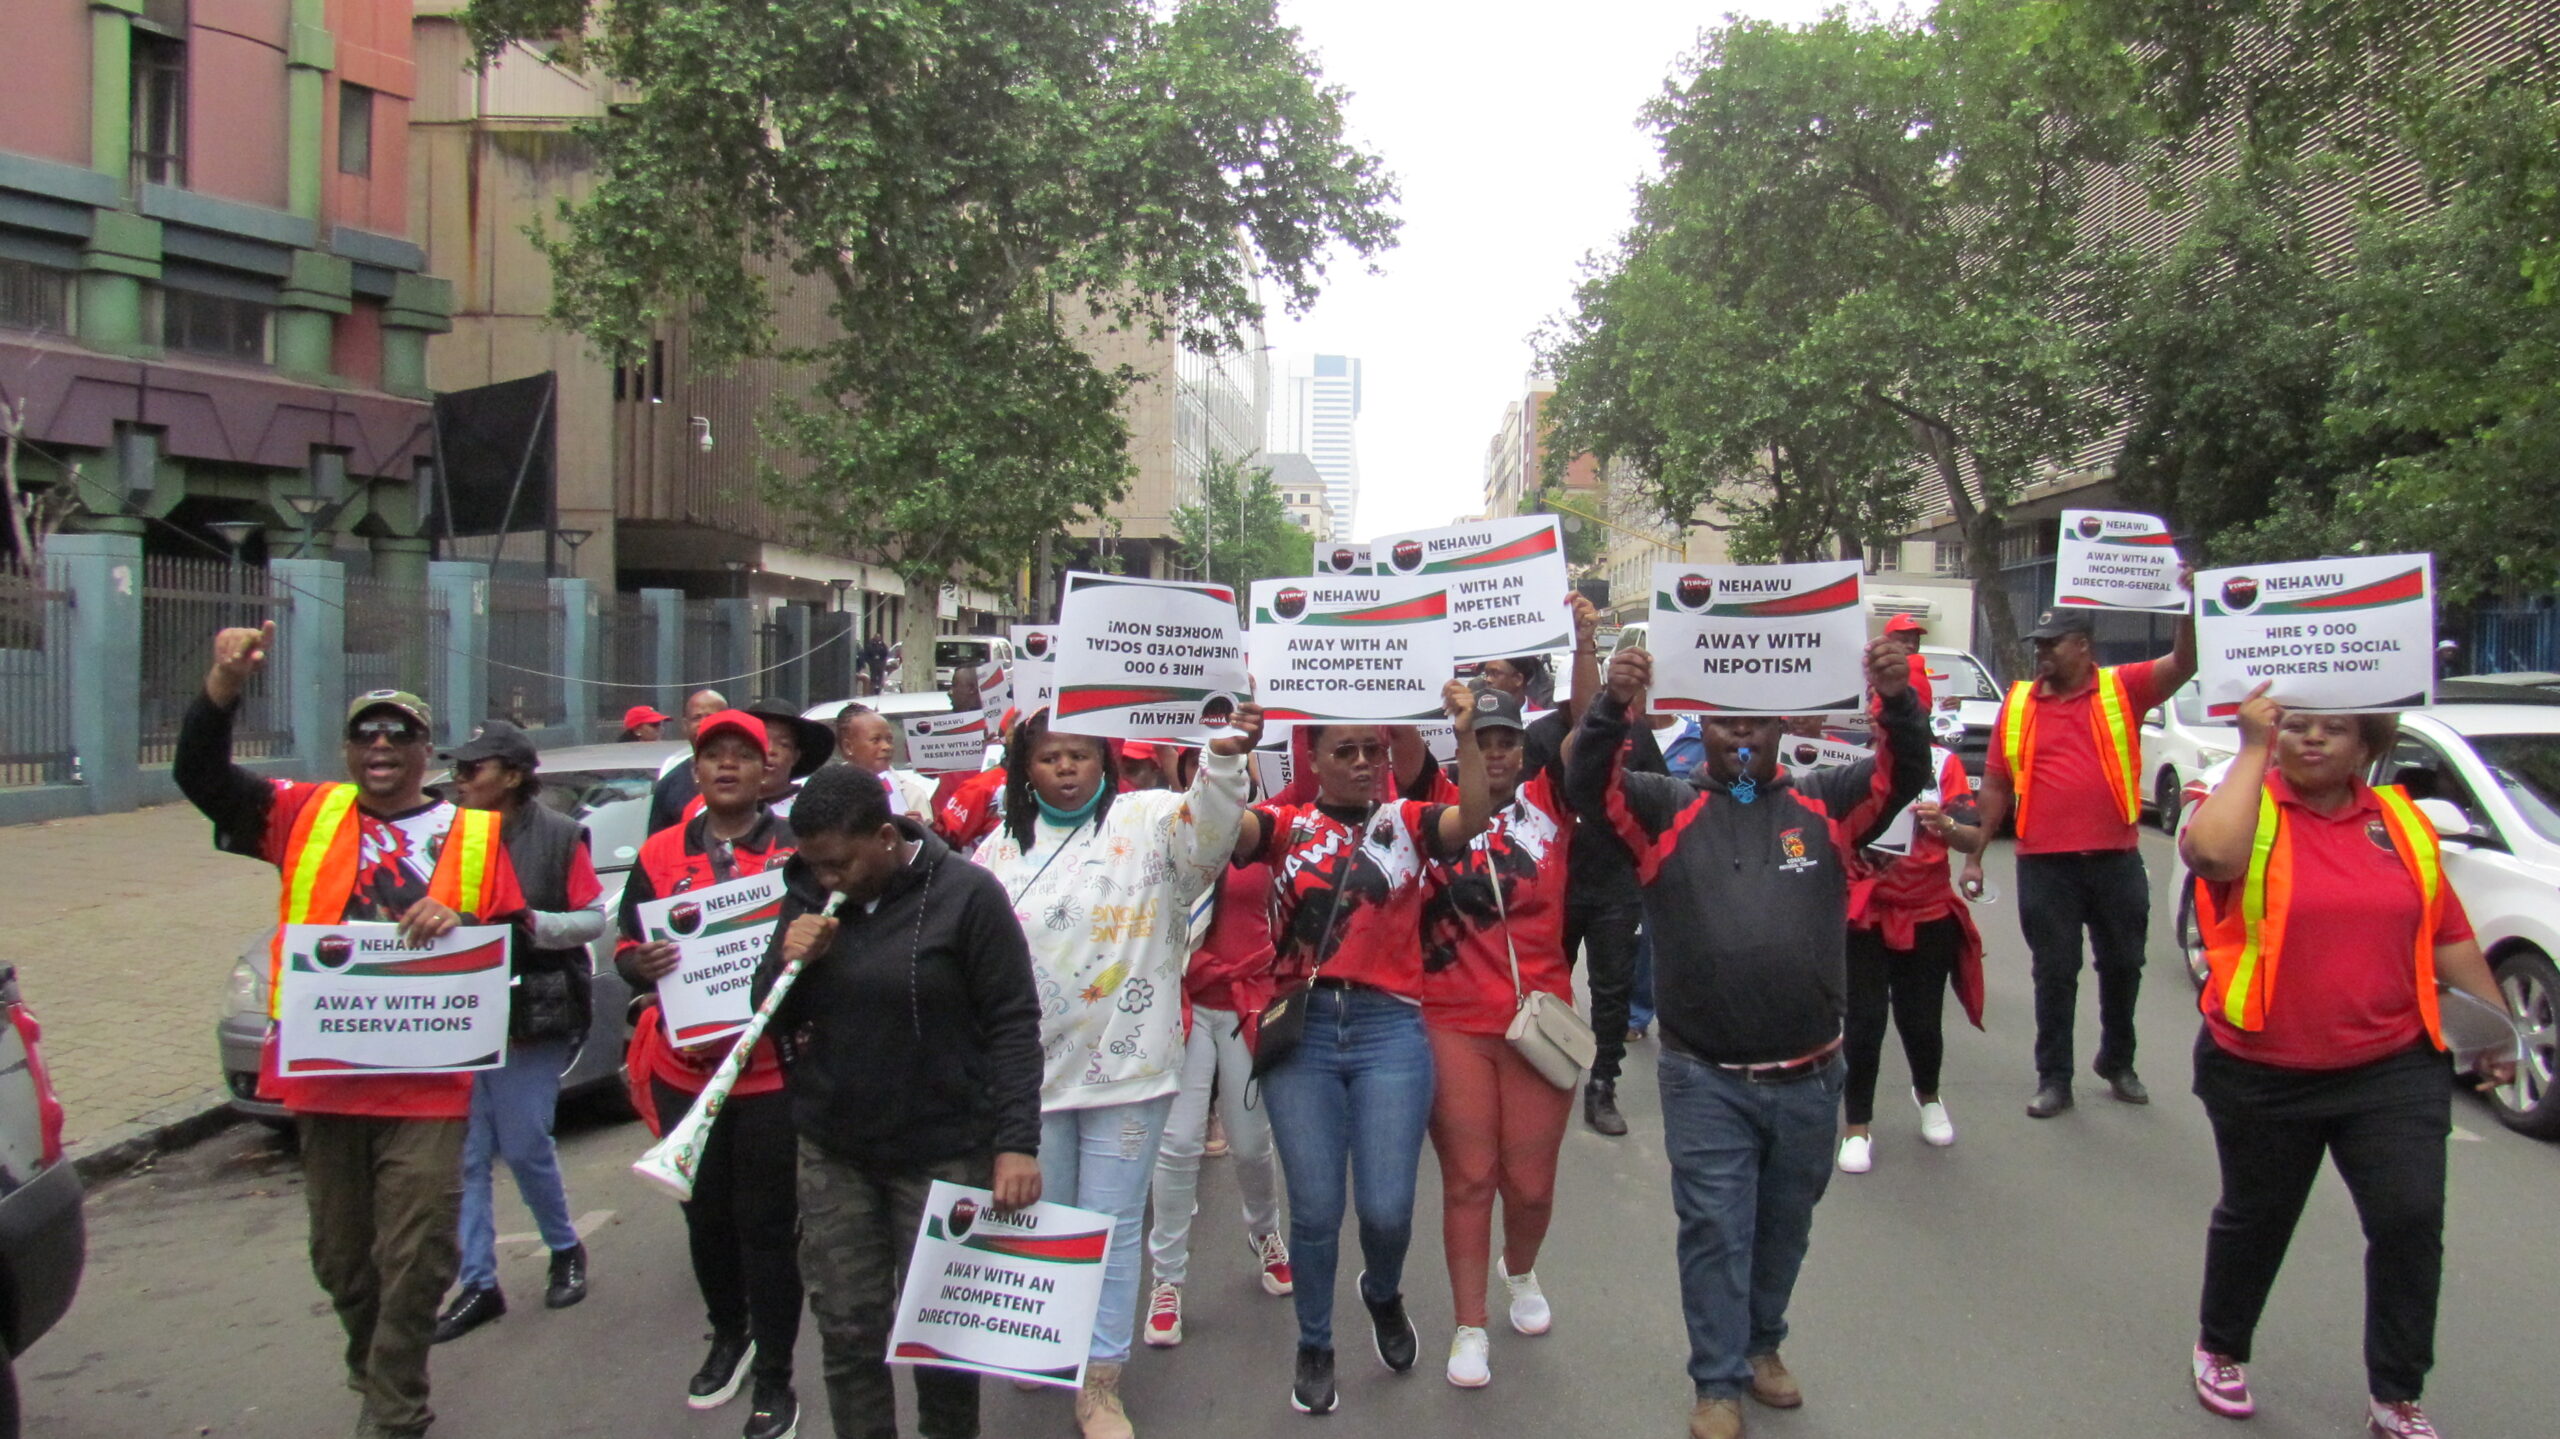 members of NEHAWU picketing outside the department of social development in Pretoria calling for the removal of acting director general